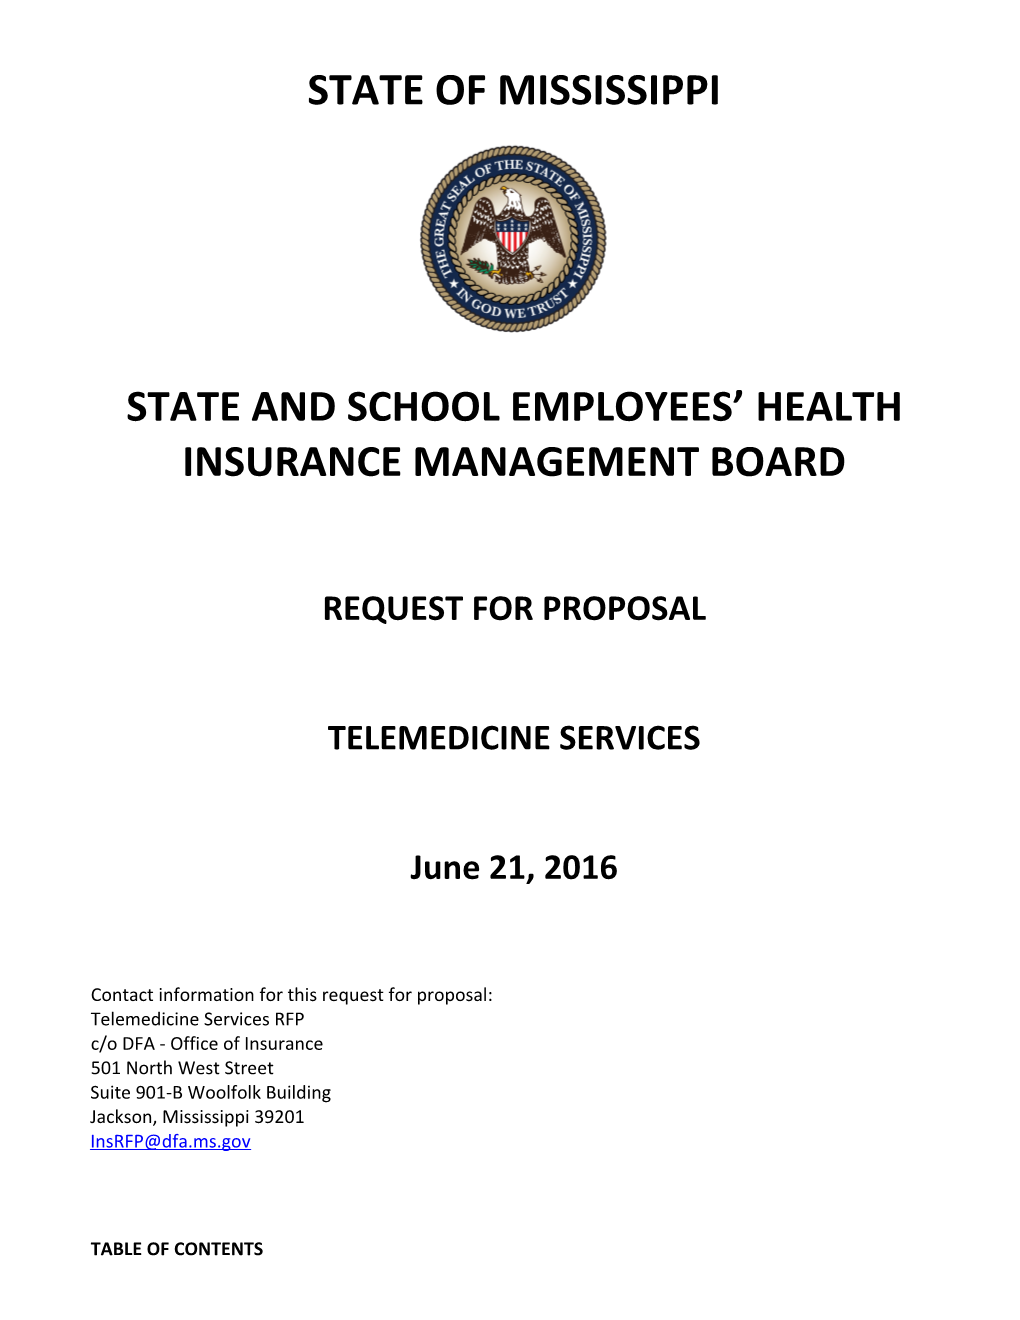 State and Schoolemployees Health Insurance Management Board